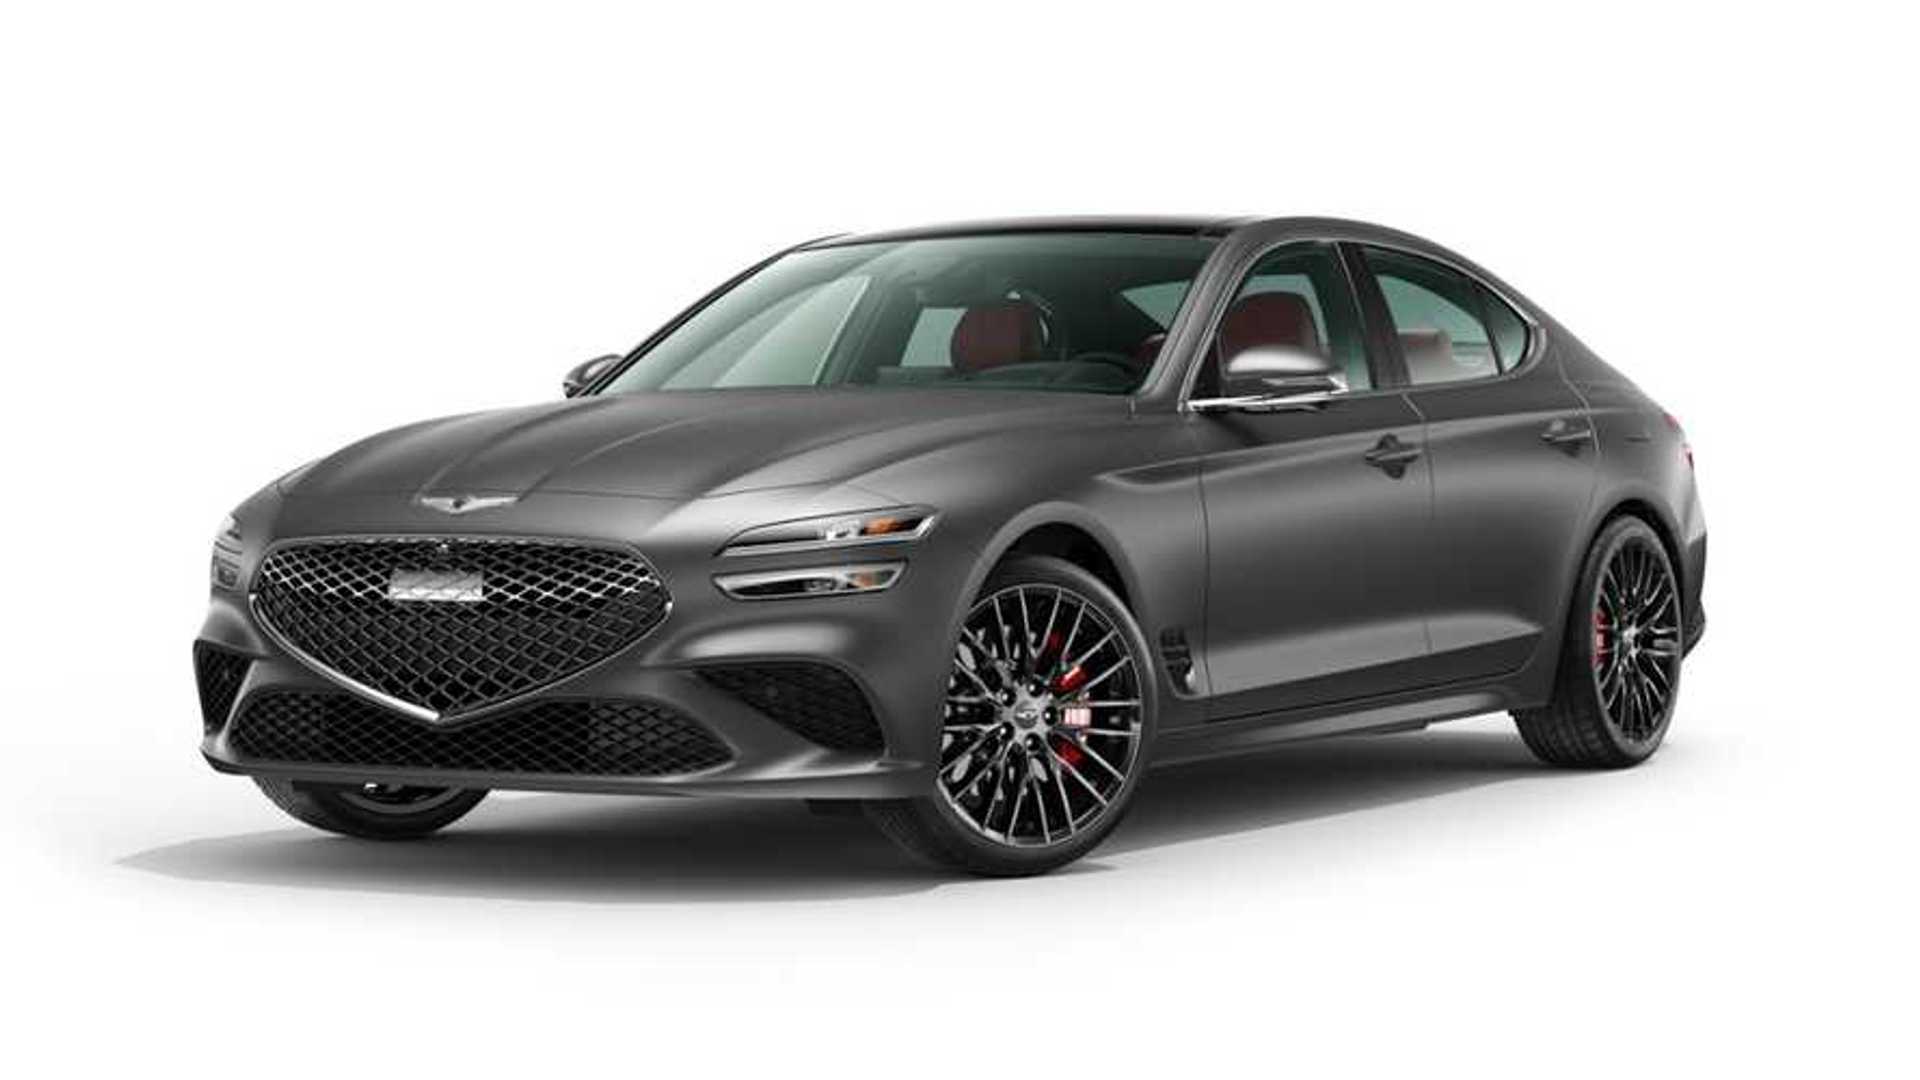 Limited 2022 Genesis G70 Launch Edition Coming, Reservation Now Open